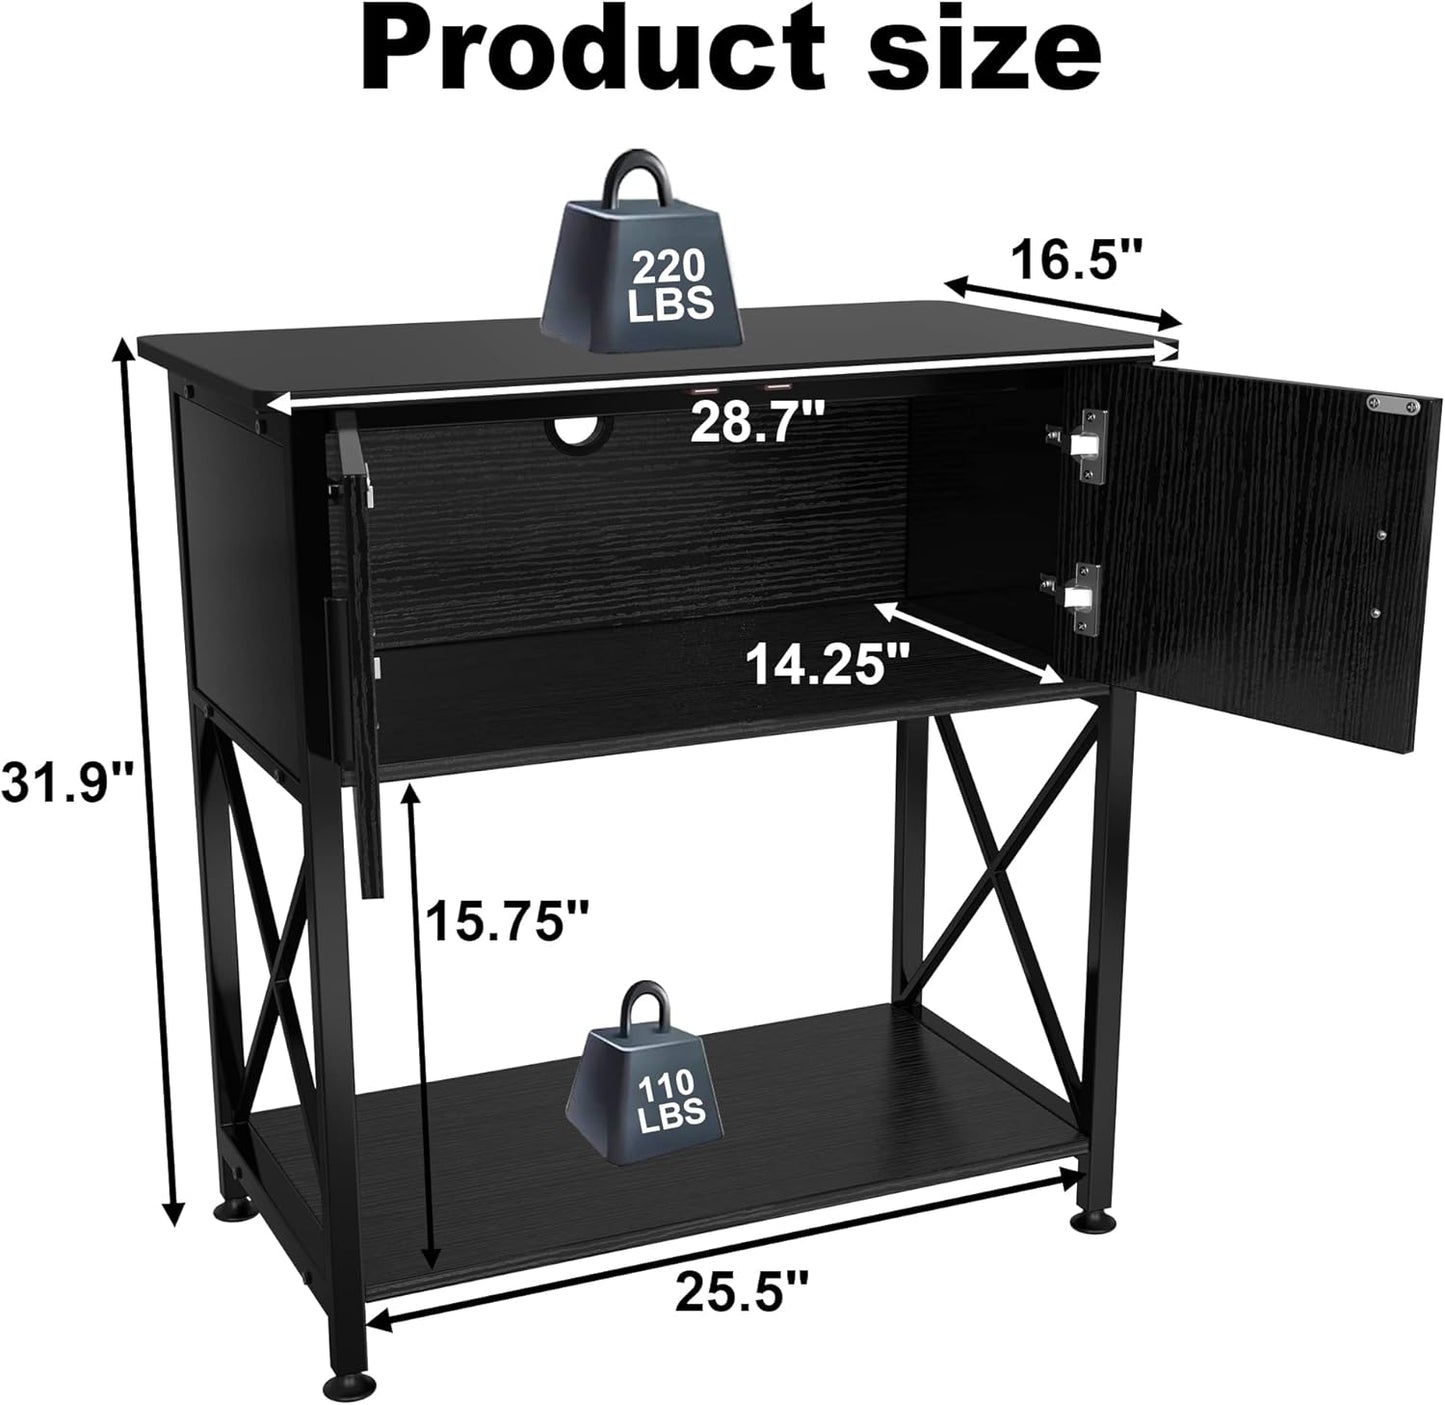 Fish Tank Stand Metal Aquarium Stand for up to 20 Gallon Long with Cabinet for Fish Tank Accessories Storage,28.7" L